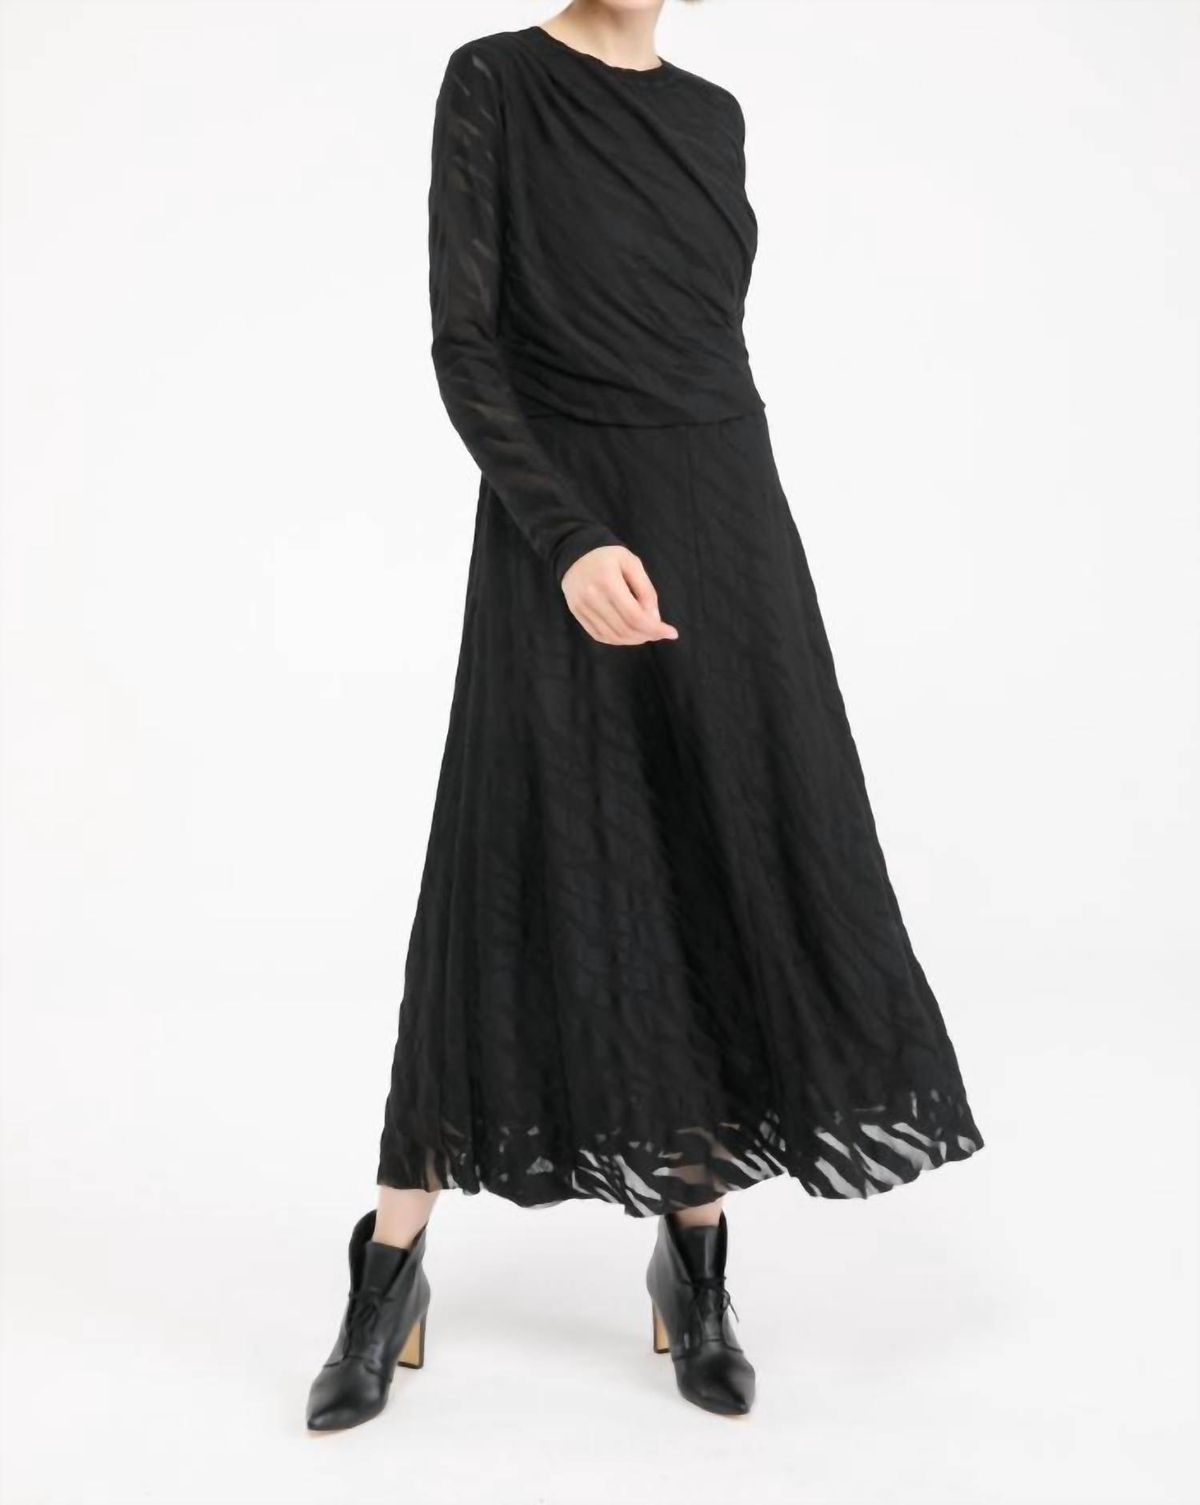 Style 1-3852851470-3471 ISLE by Melis Kozan Size S Long Sleeve Sheer Black Cocktail Dress on Queenly